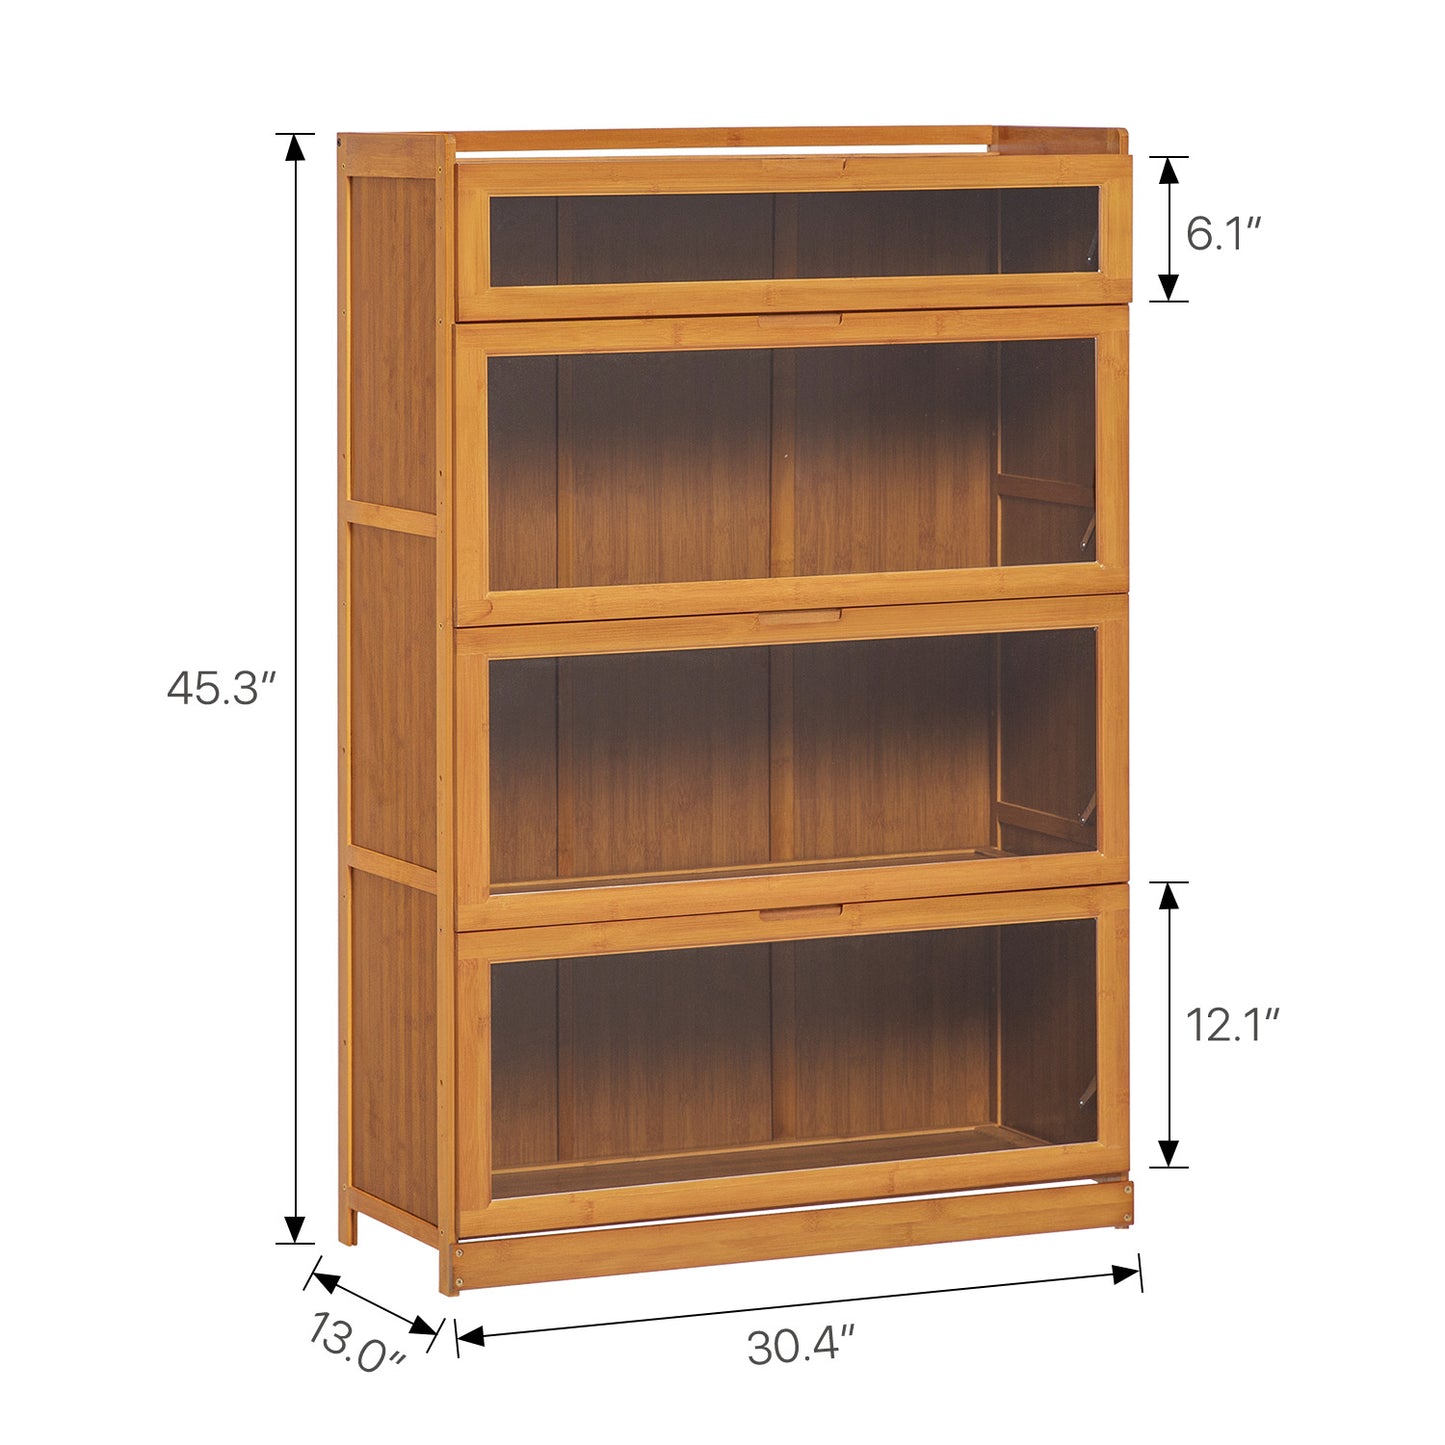 Visible Drop Down Door Bookcase w/Short Compartment - Bamboo/Acrylic - Brown